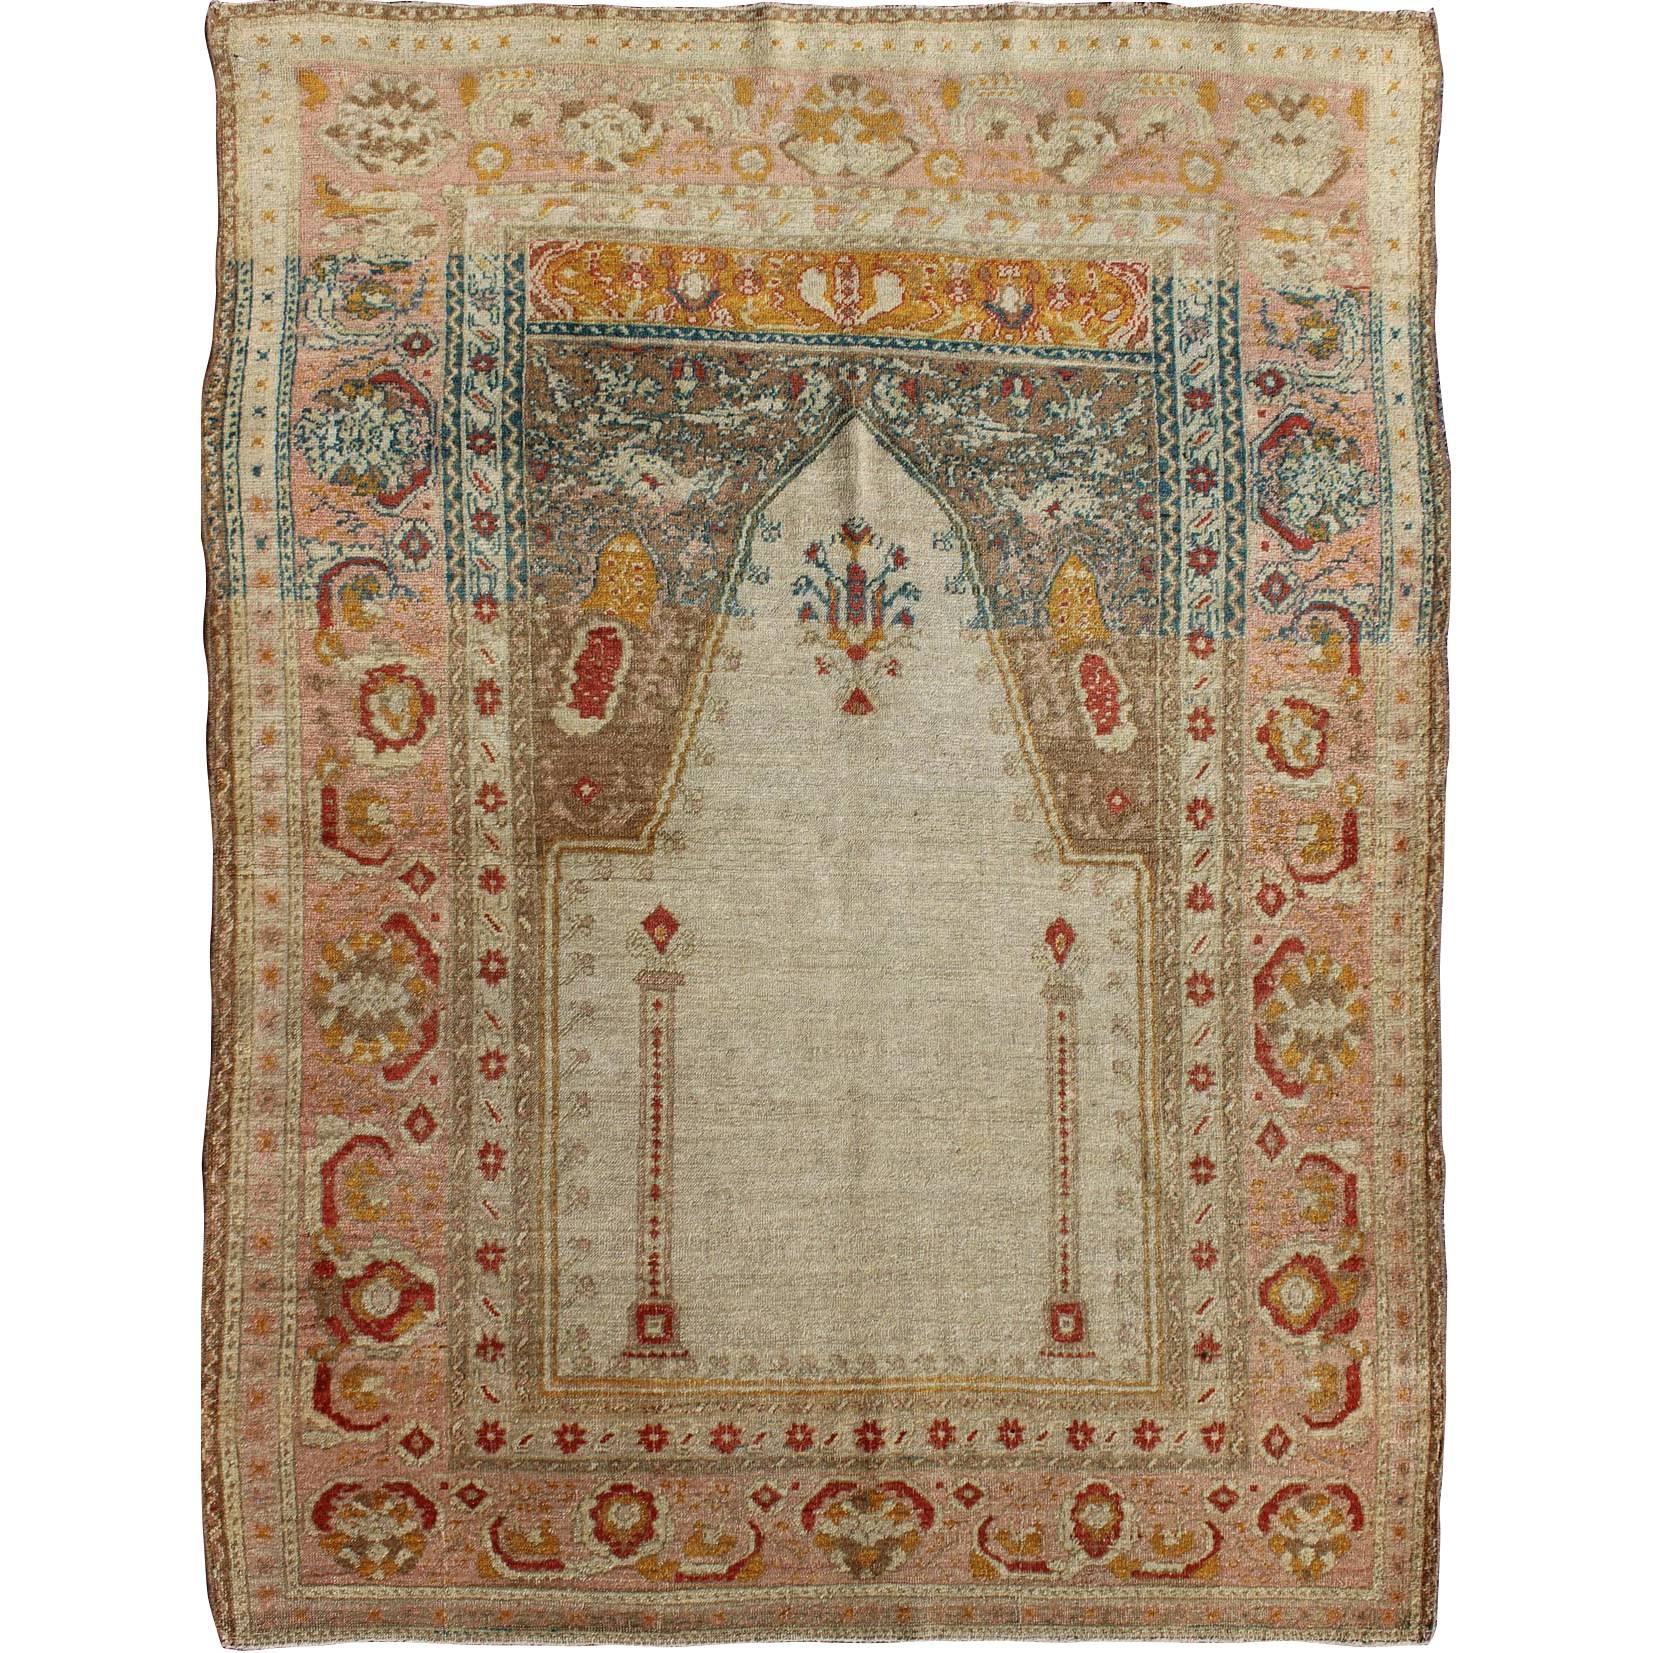 Antique Turkish Sivas Prayer Rug with Floral Design in Ivory, Taupe, and Pink For Sale